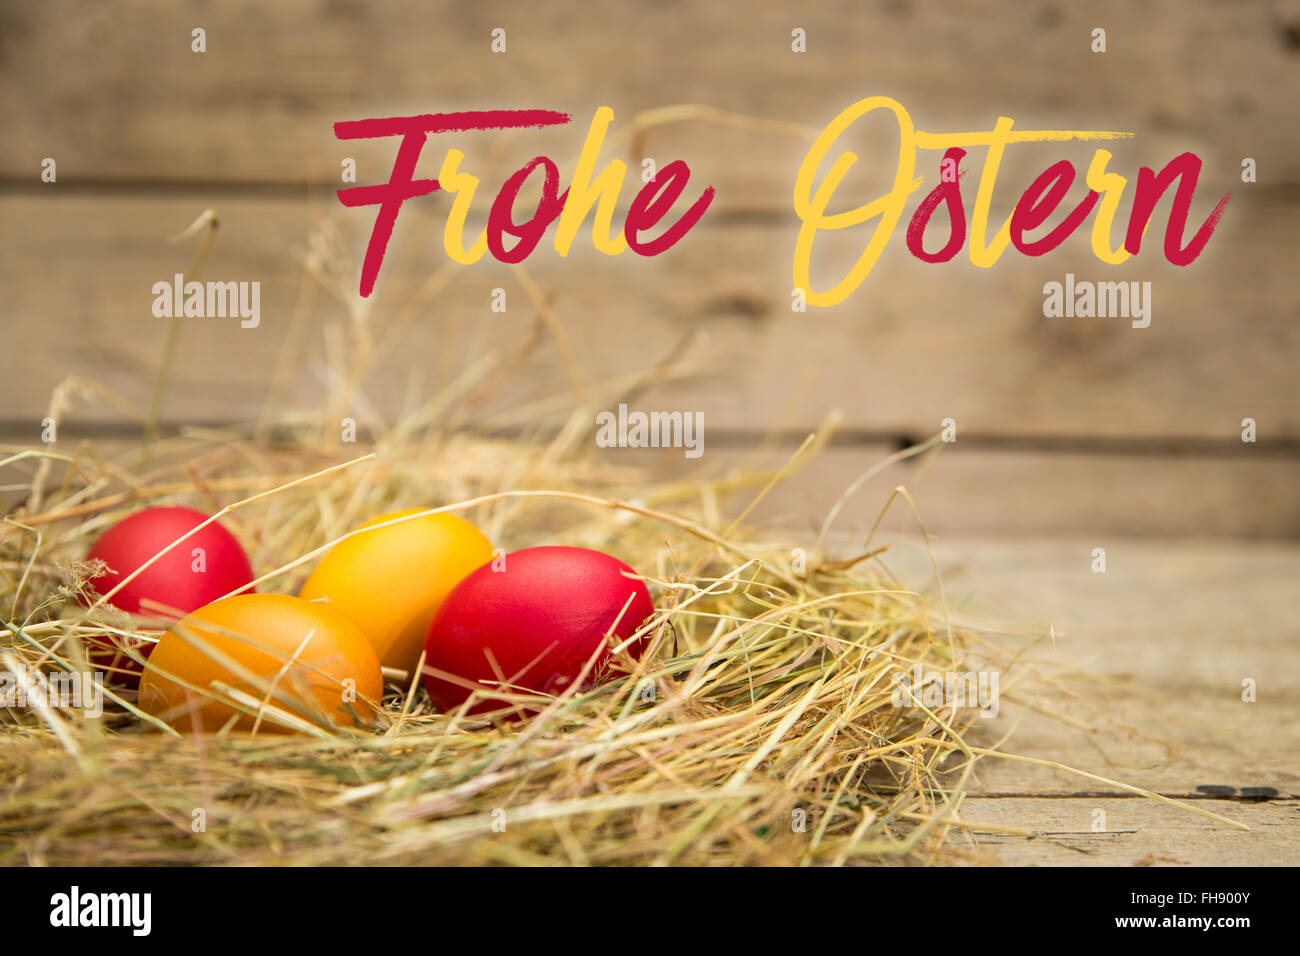 easter nest with german text frohe ostern, which means happy easter. wooden background Stock Photo